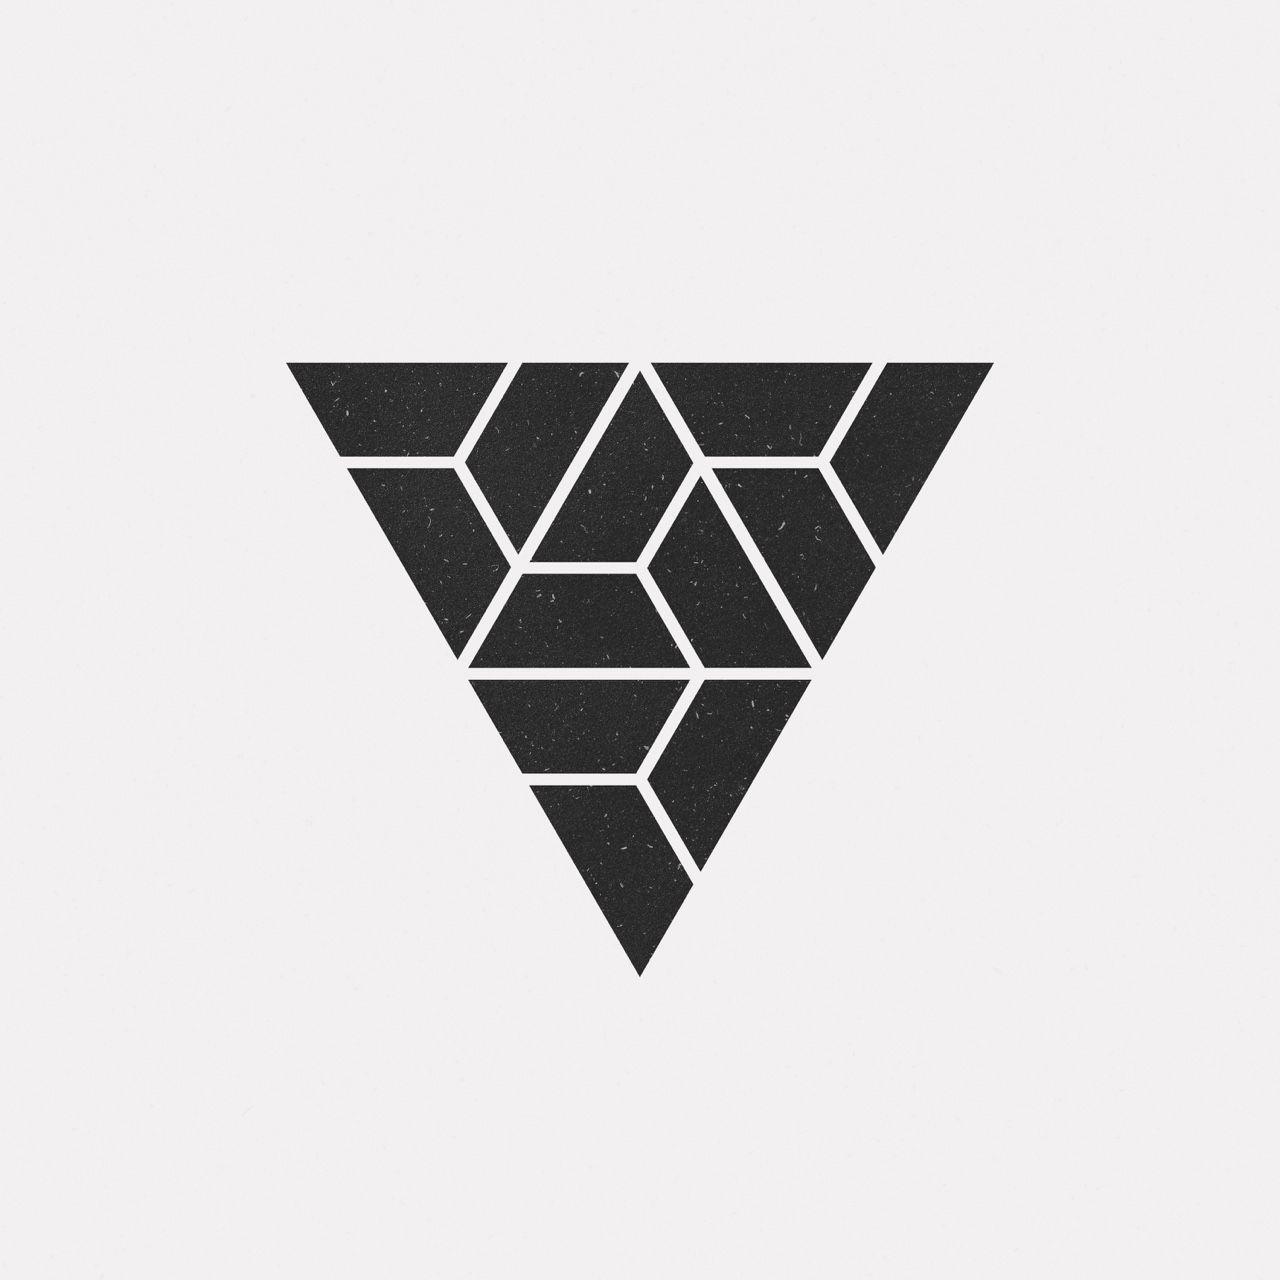 Triangle Art Logo - NO15-411 A new geometric design every dayBuy my posters on ...